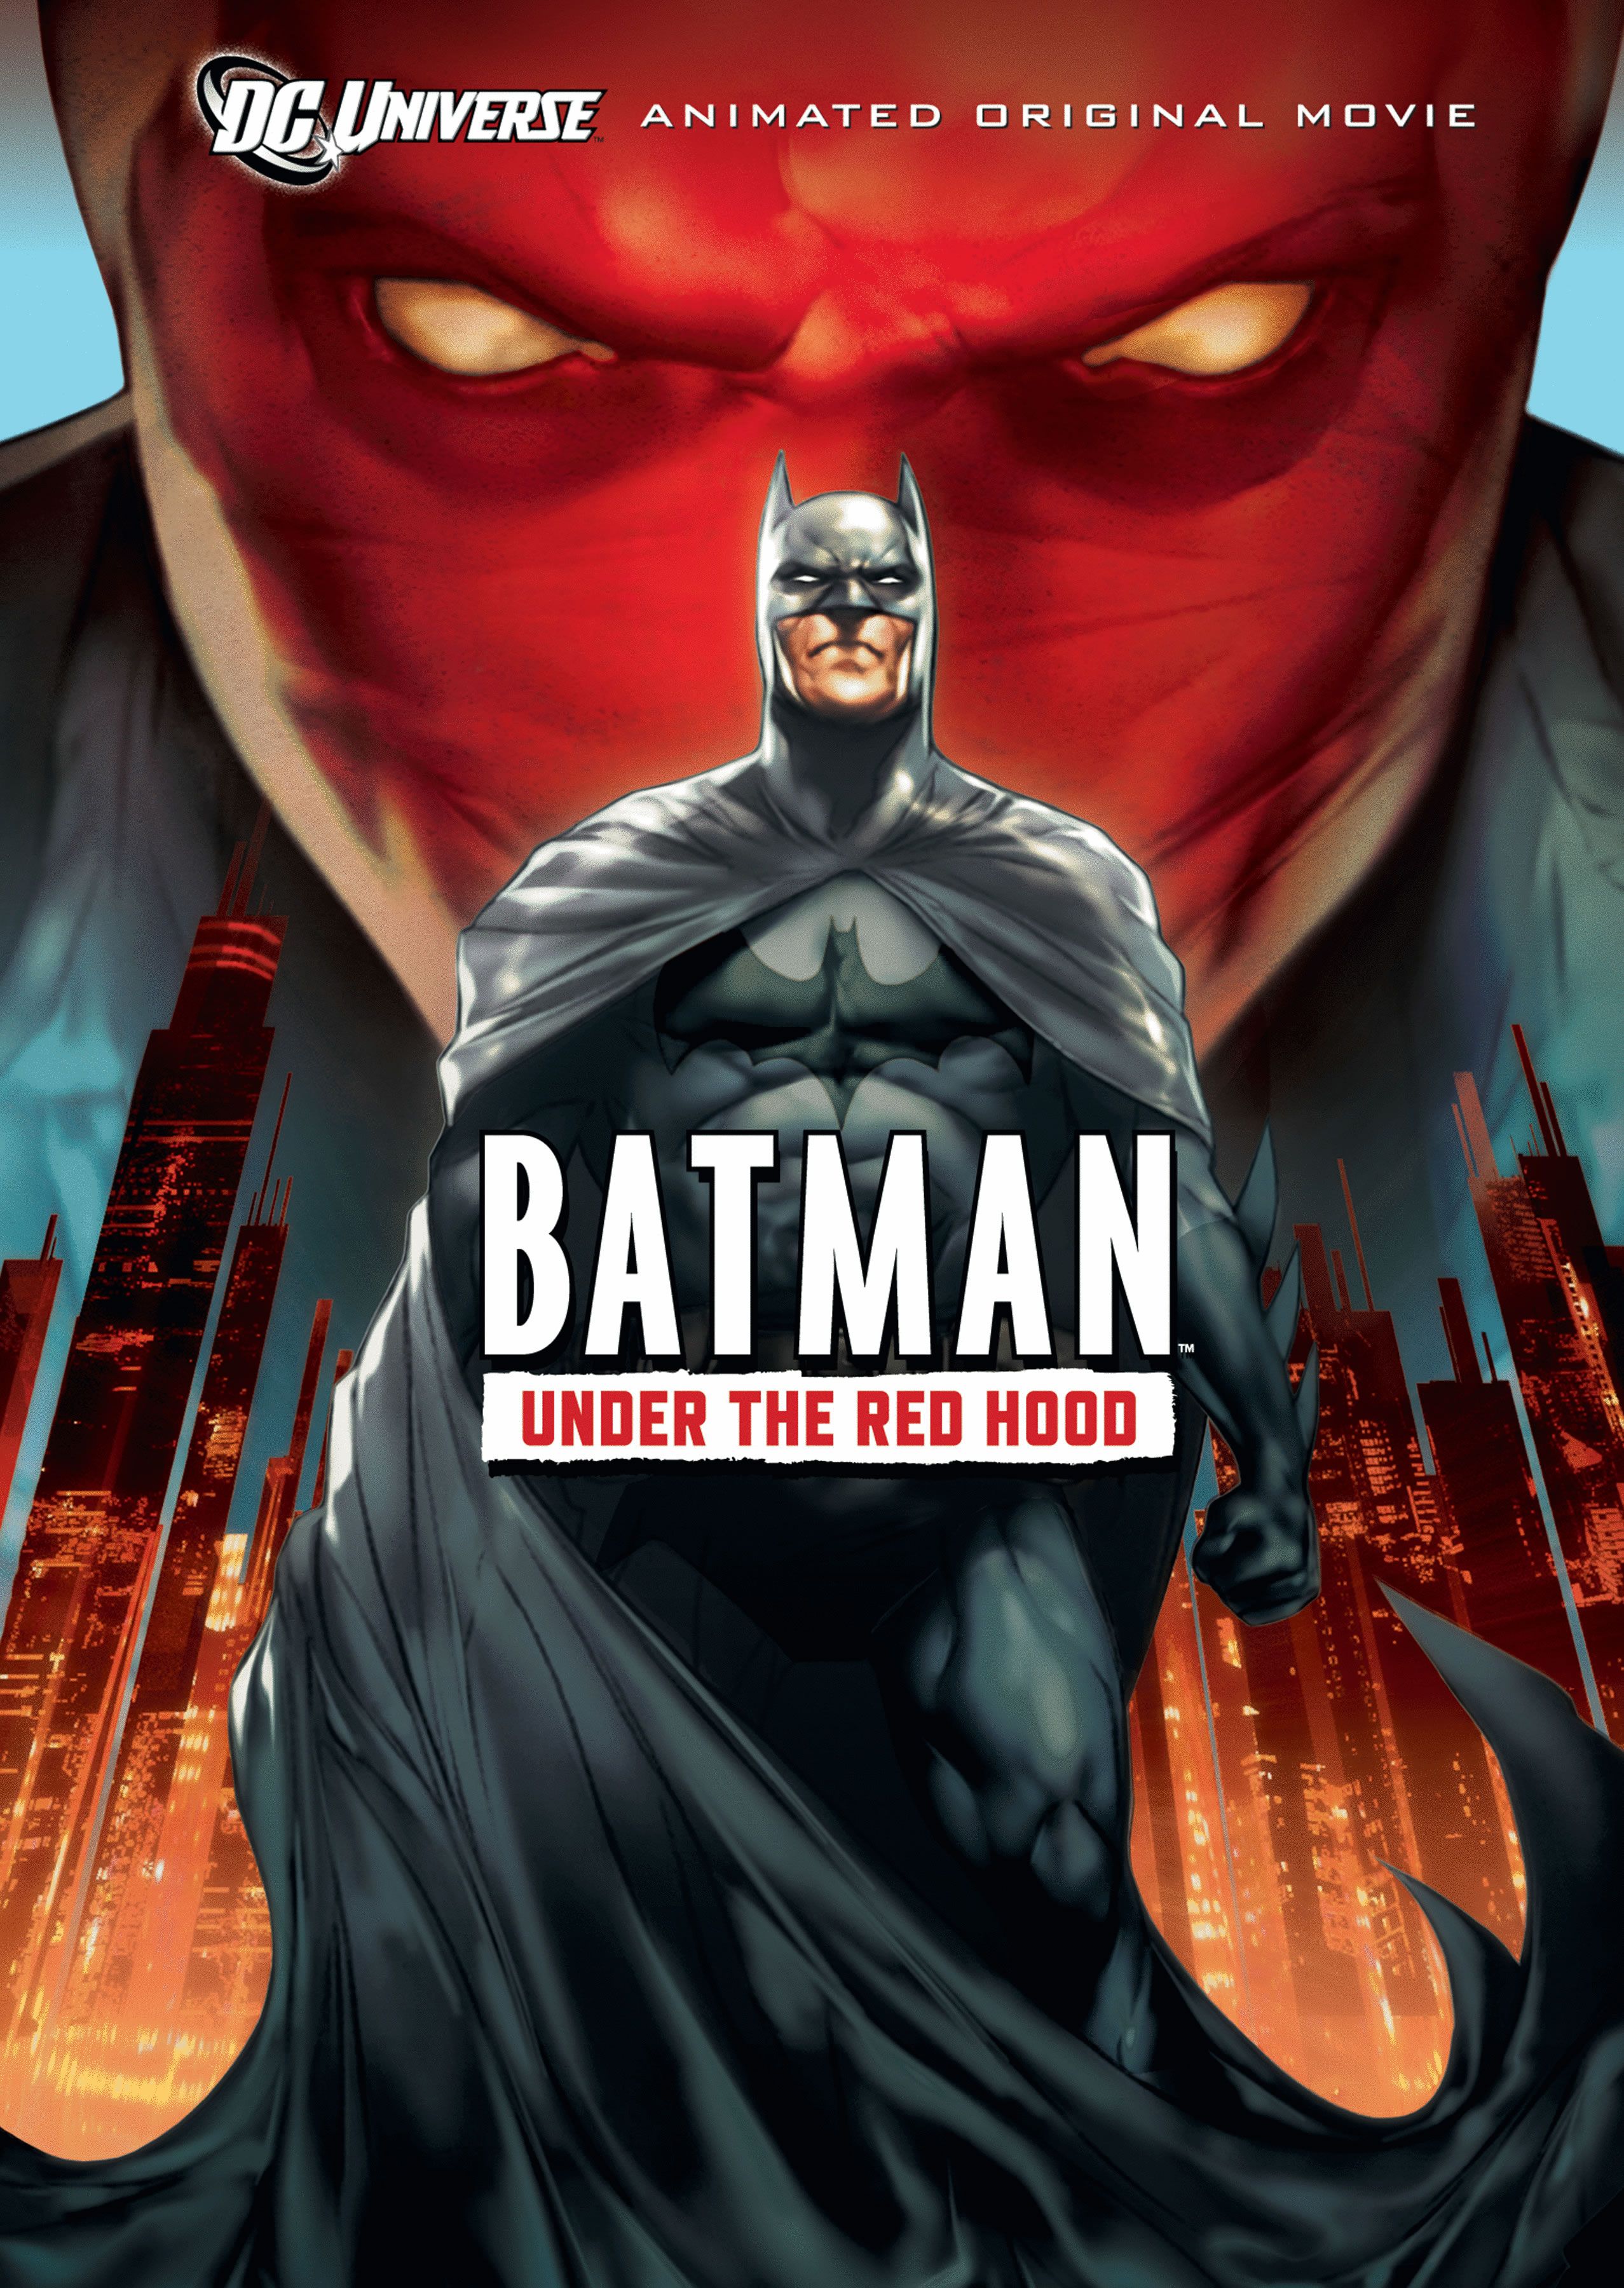 Batman Solo Movie to Feature Red Hood | Collider